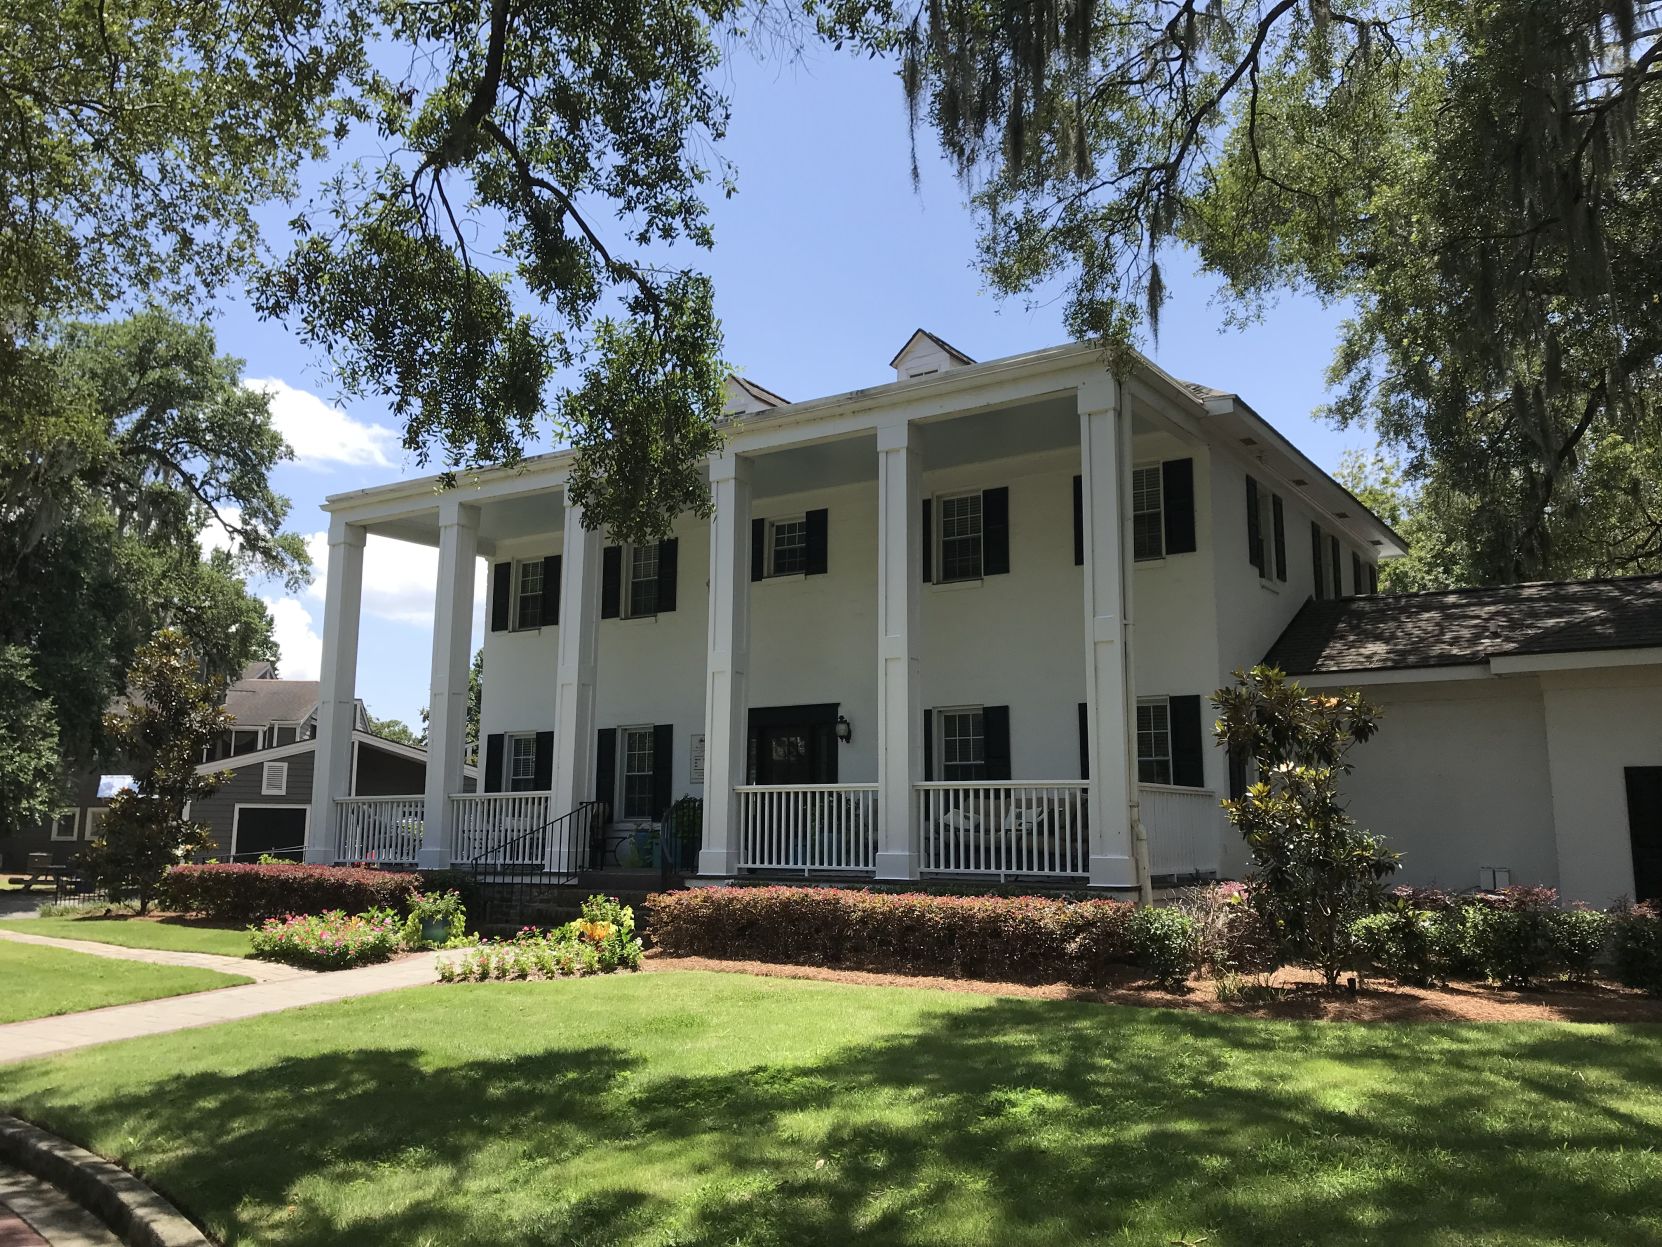 2 Charleston apartment complexes fetch 